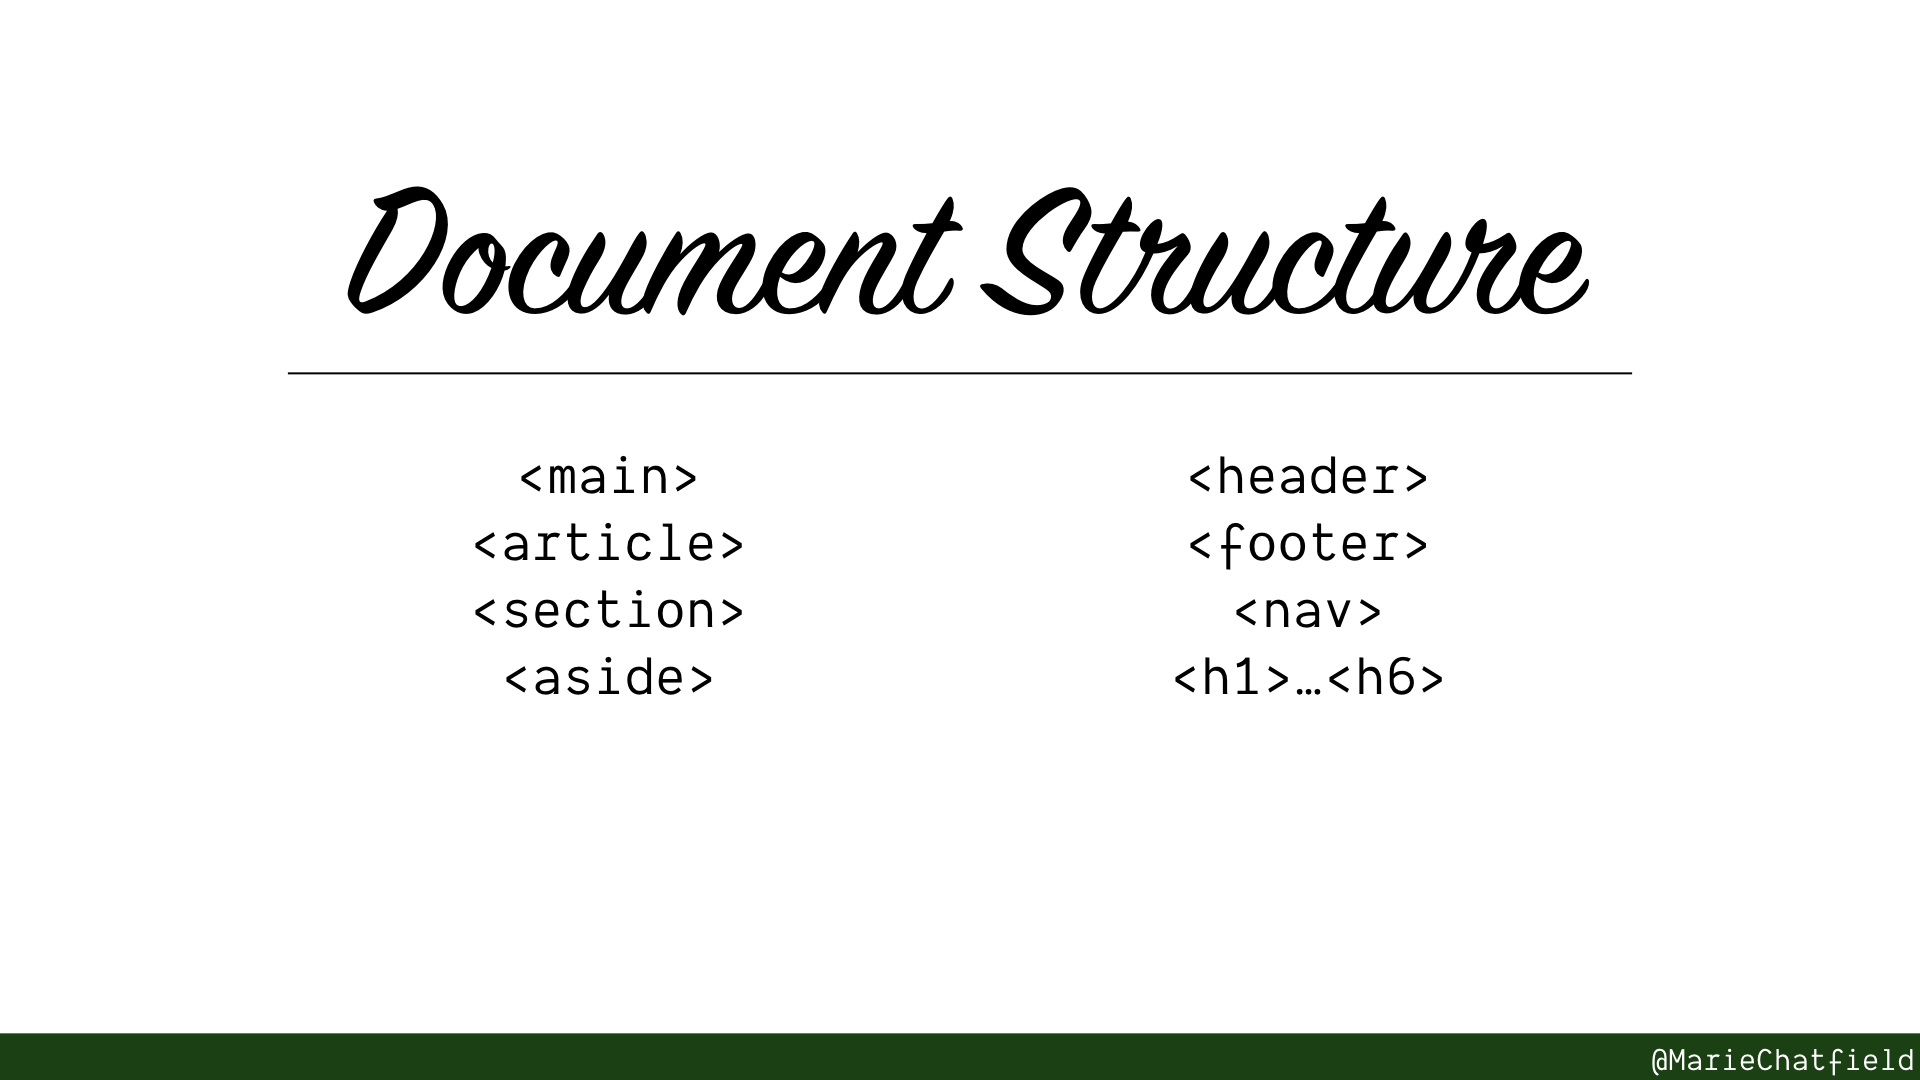 Slide of Document Structure with HTML elements listed